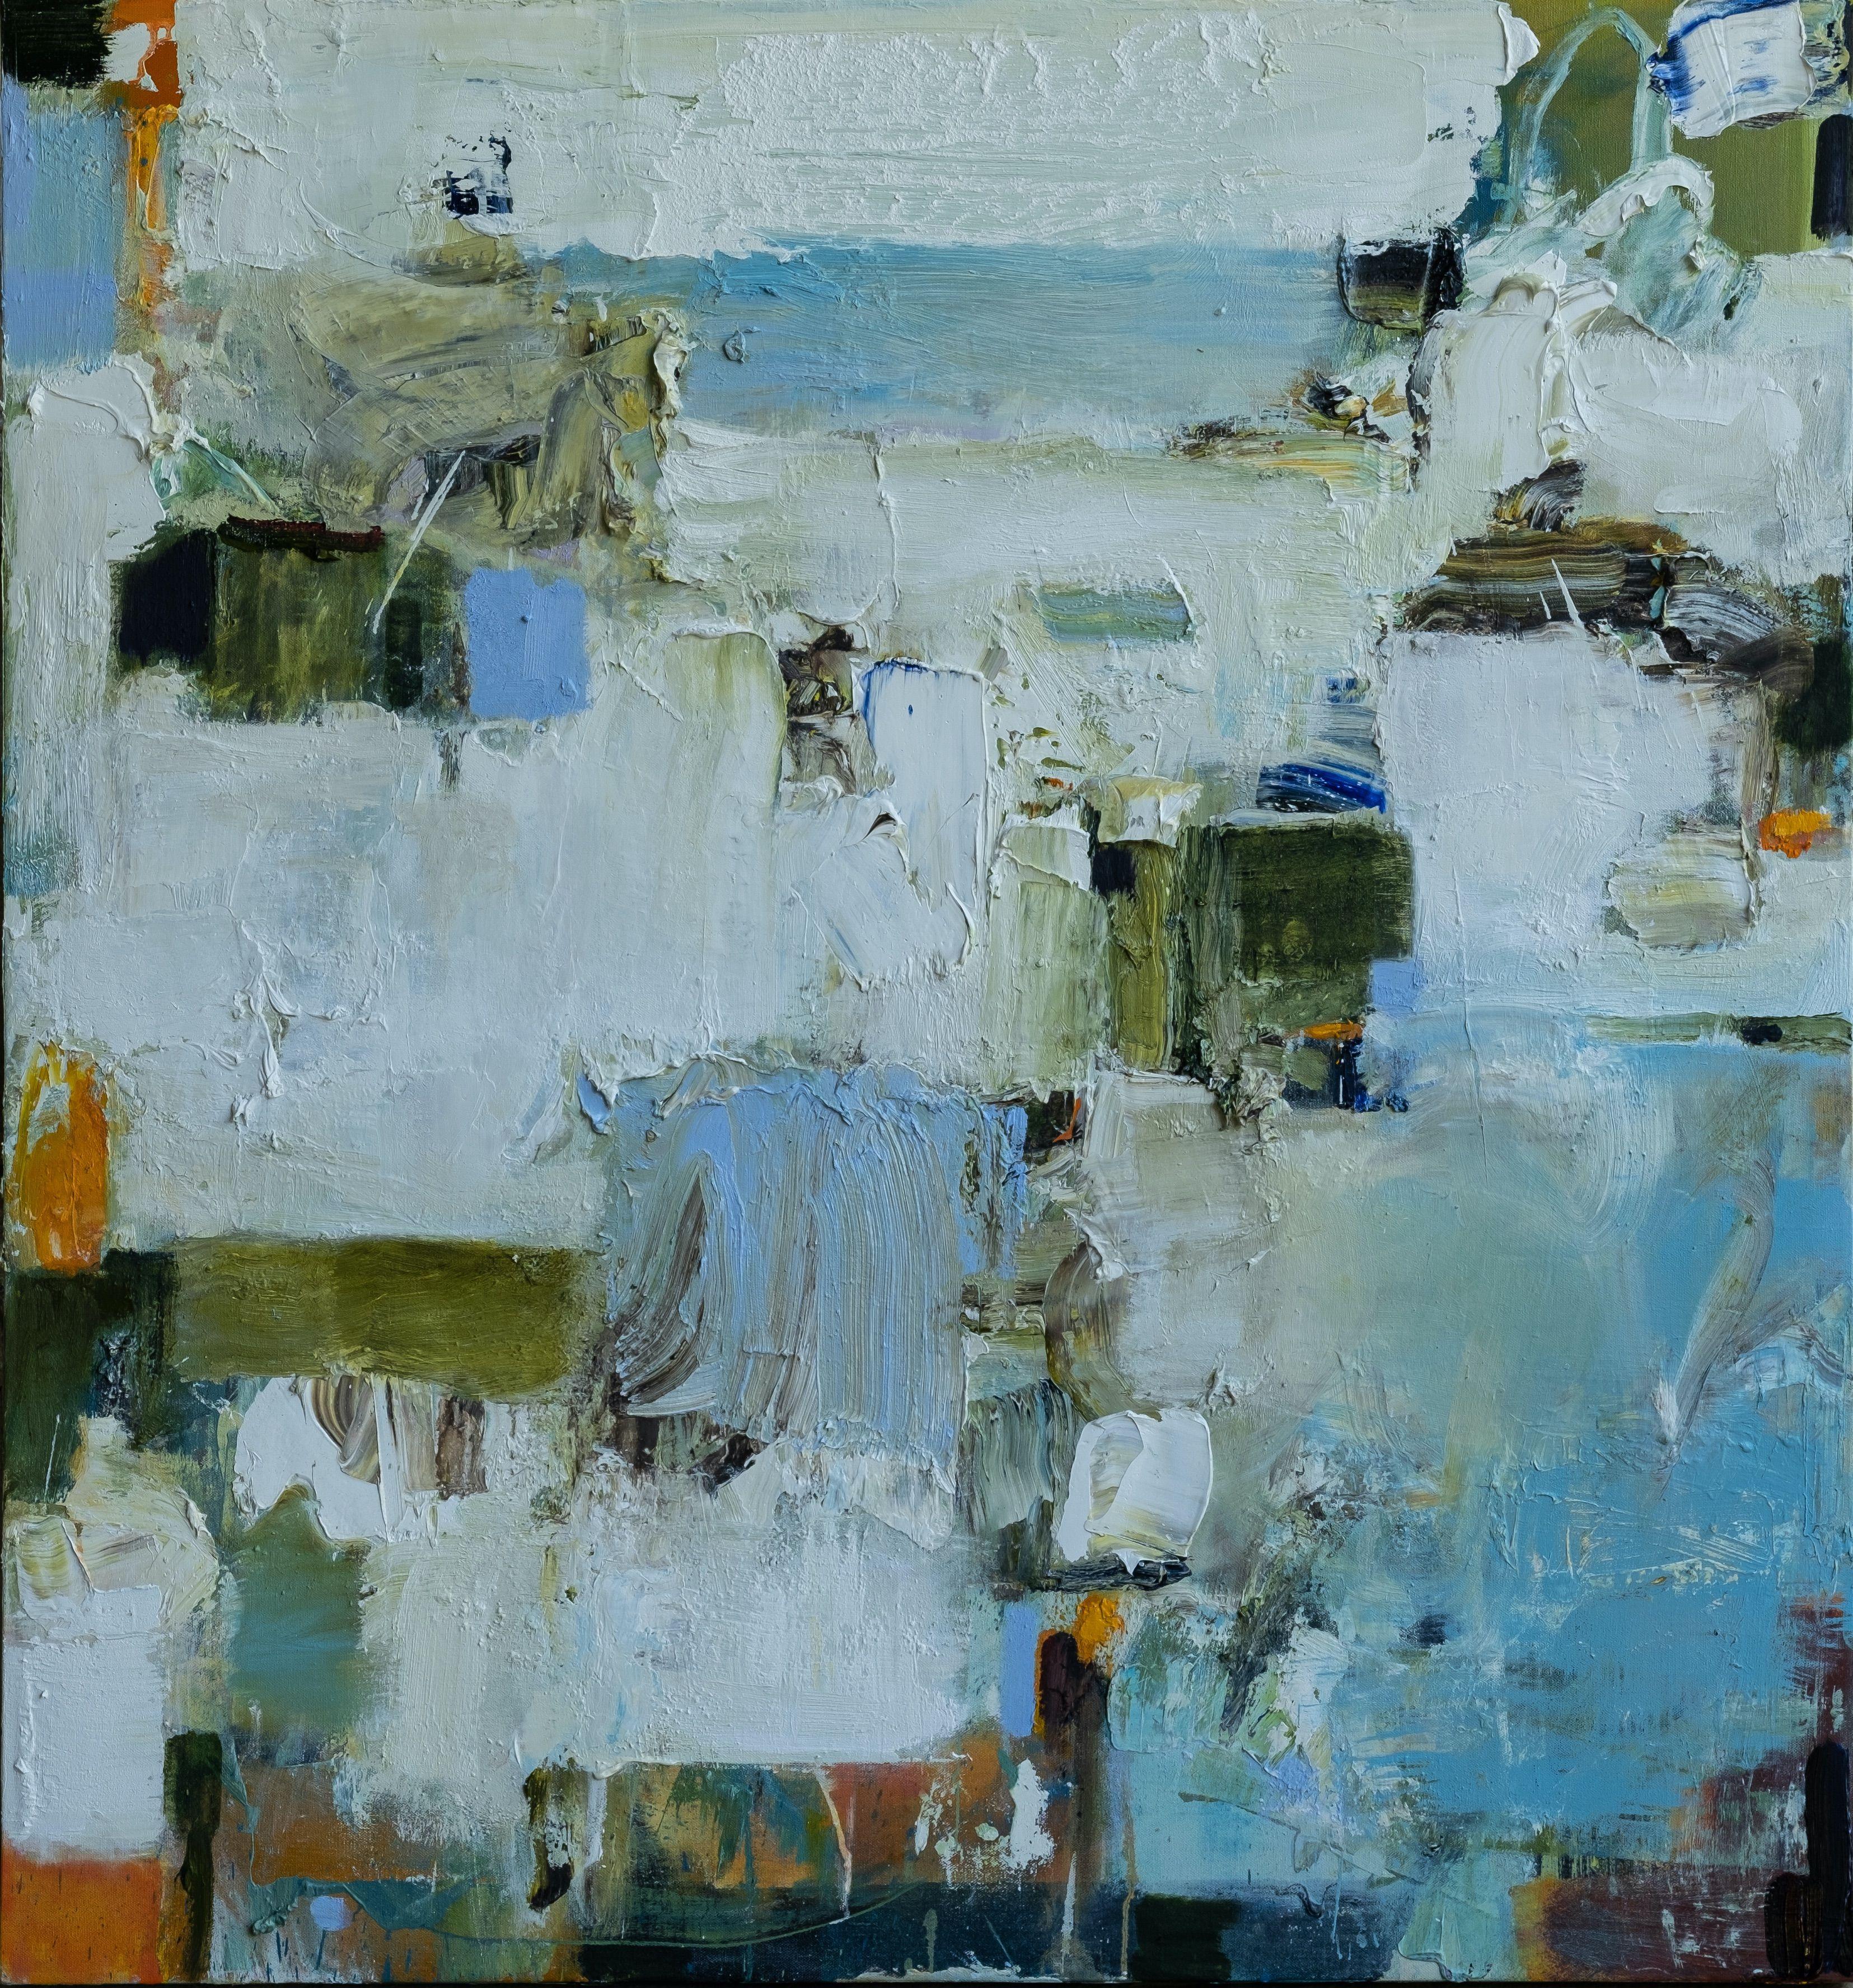 Abstract, contemporary painting full of various shades of blues, white, and cream. There is plenty of rich texture due to many layers of thick oil paint. Painting reminds me of driving along Amalfi Coast and seeing all these small homes built into